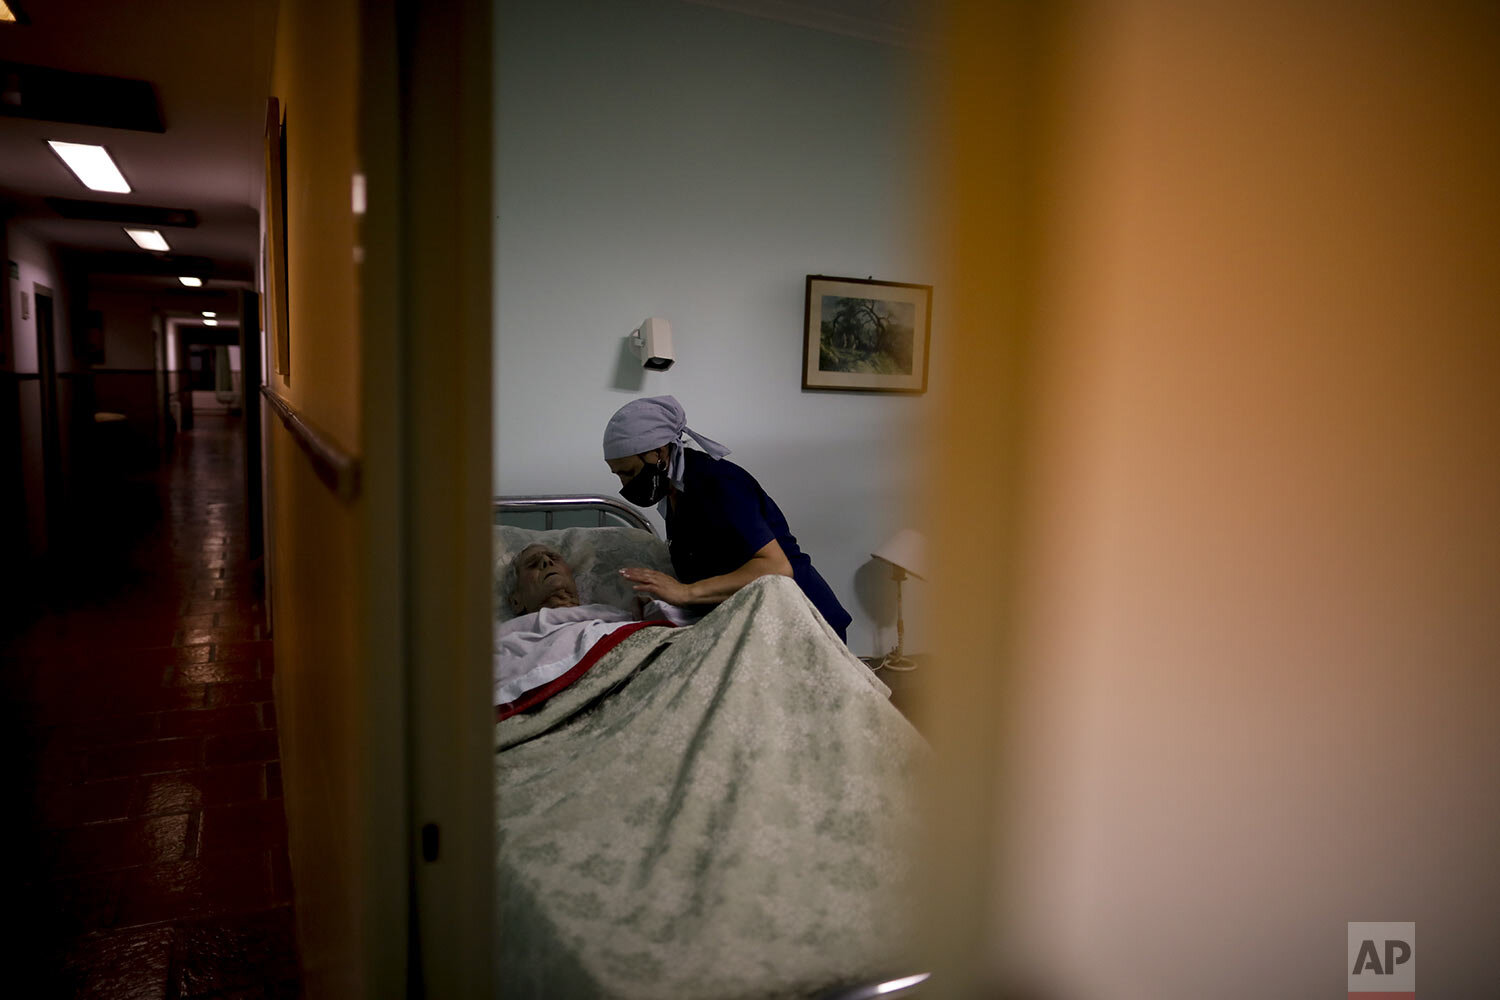  Victor Tripiana, 86, is put to bed by a nurse at the Reminiscencias residence for the elderly in Tandil, Argentina, Sunday, April 4, 2021.  (AP Photo/Natacha Pisarenko) 